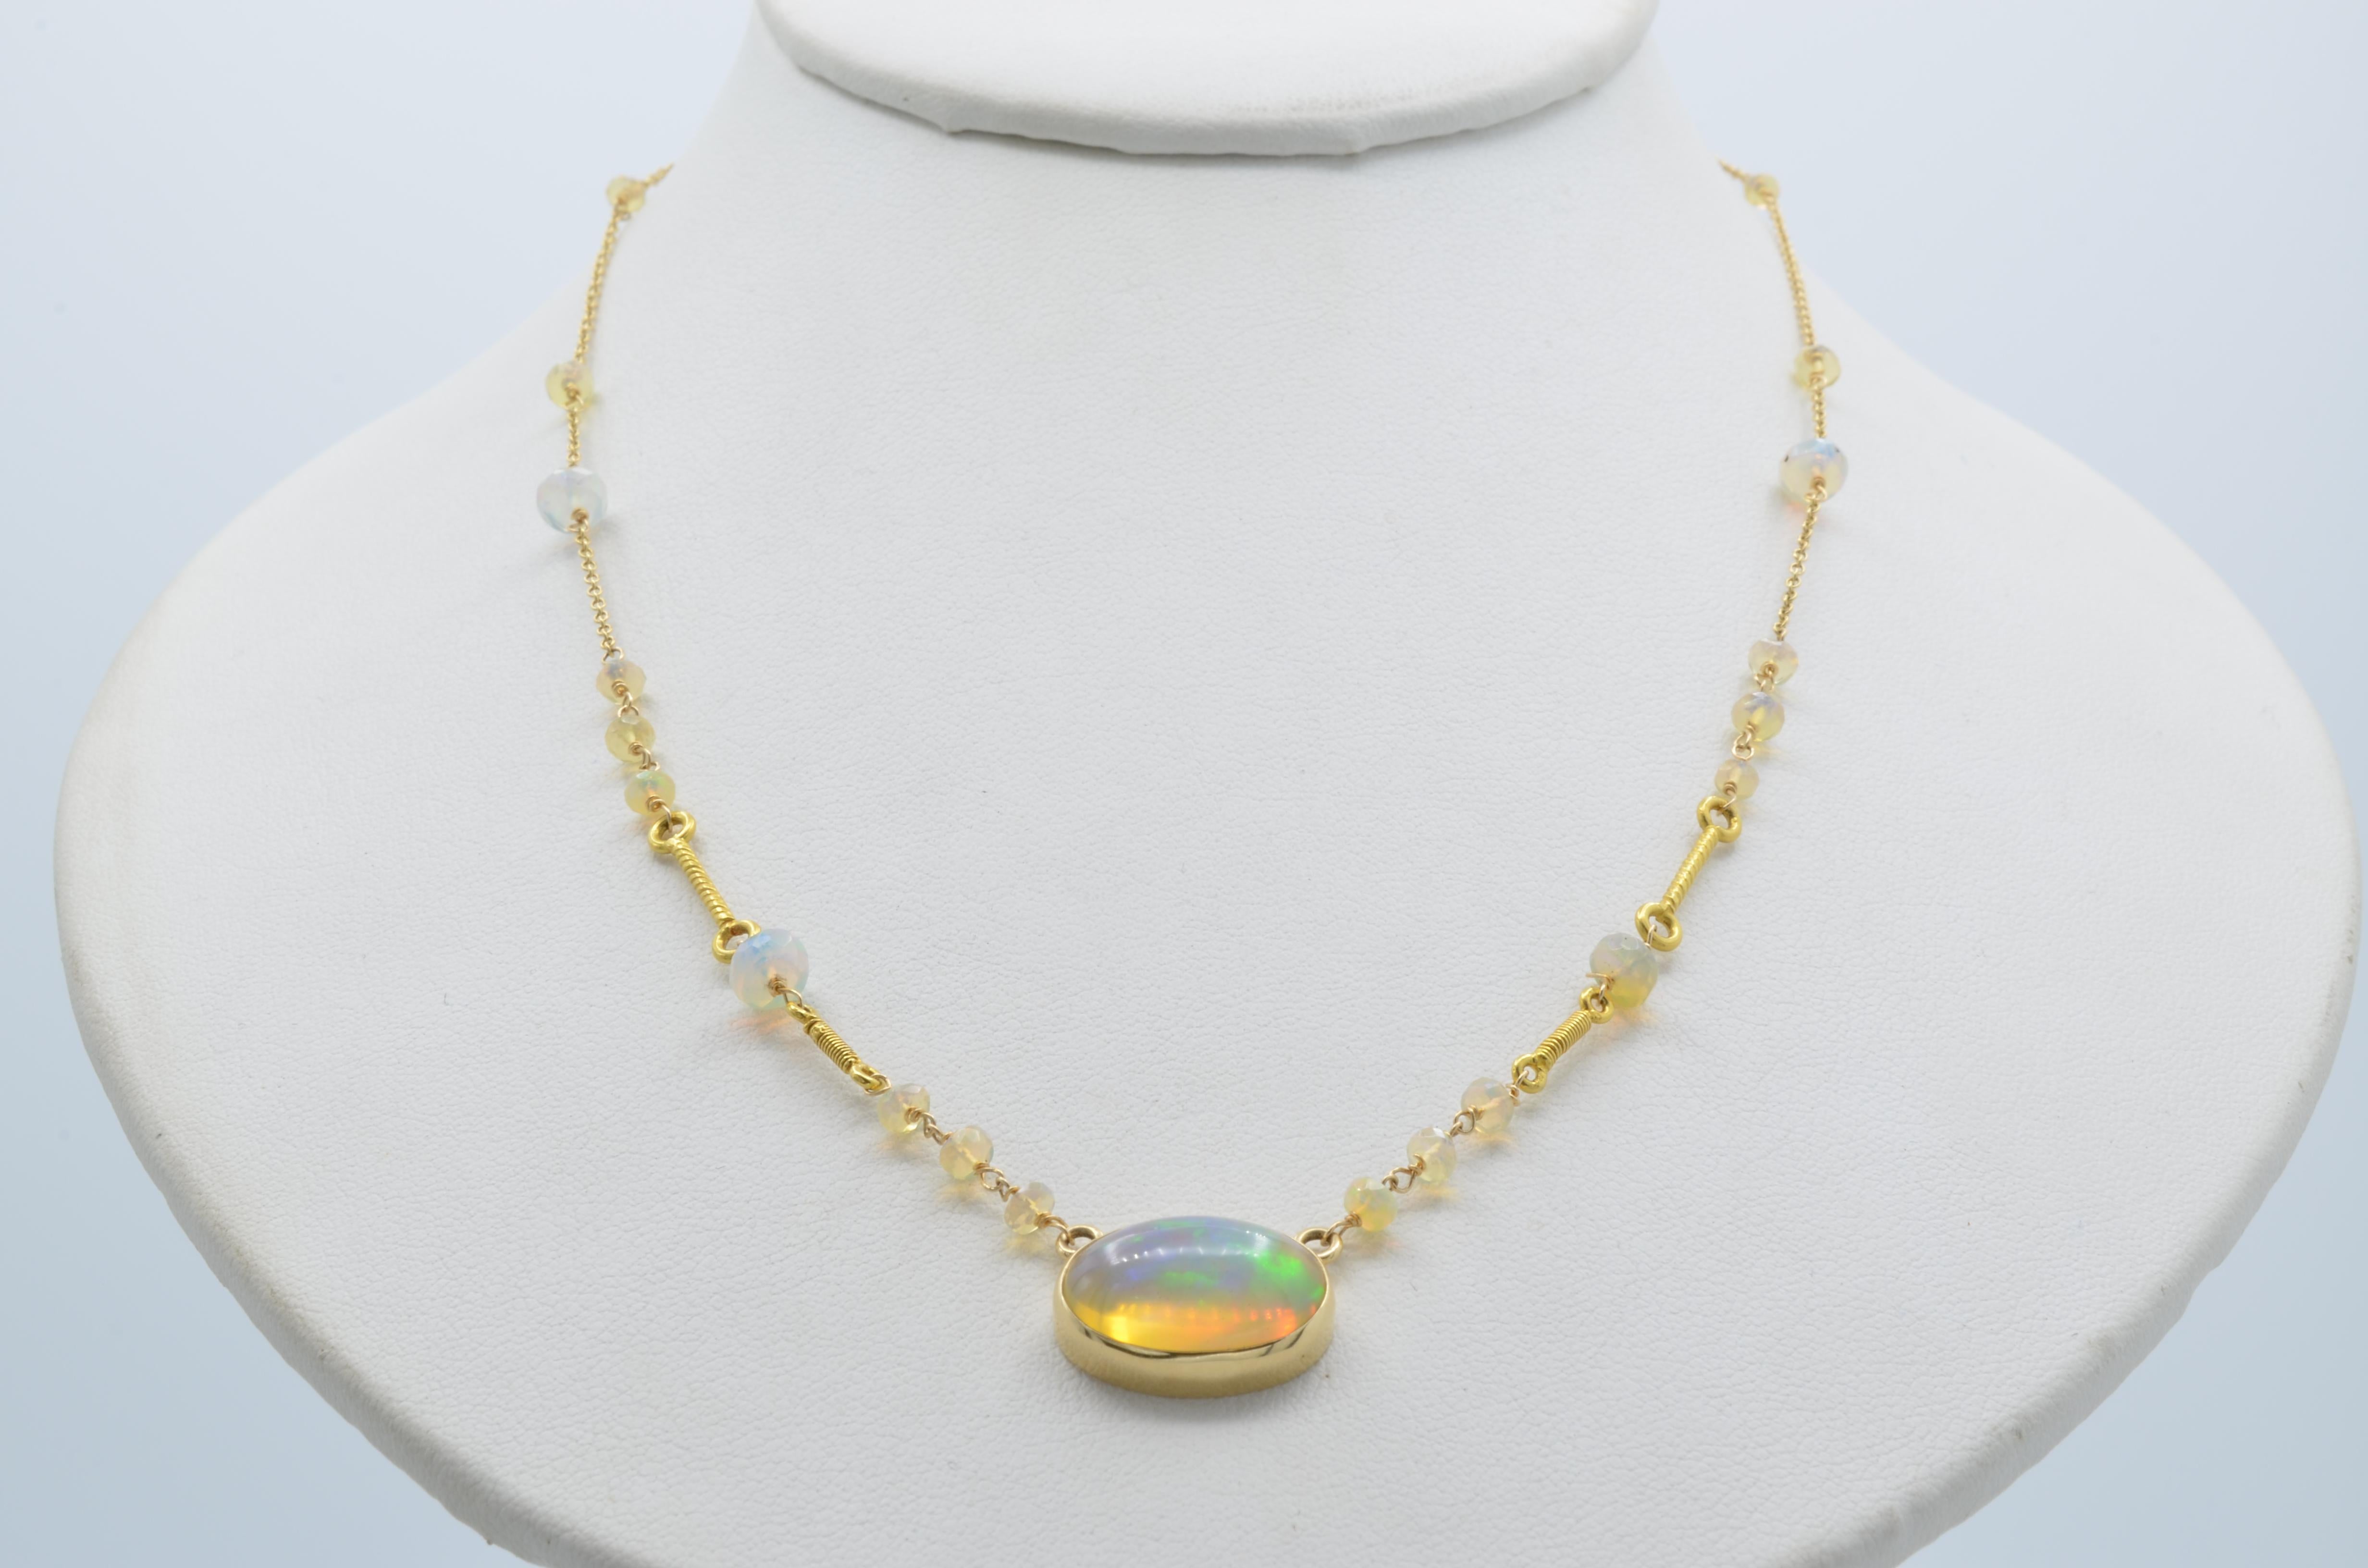 One large oval cabochon sits center on a 14K gold chain with alternating faceted opal beads. Intricately detailed, this regal necklace sings of beauty and elegance.